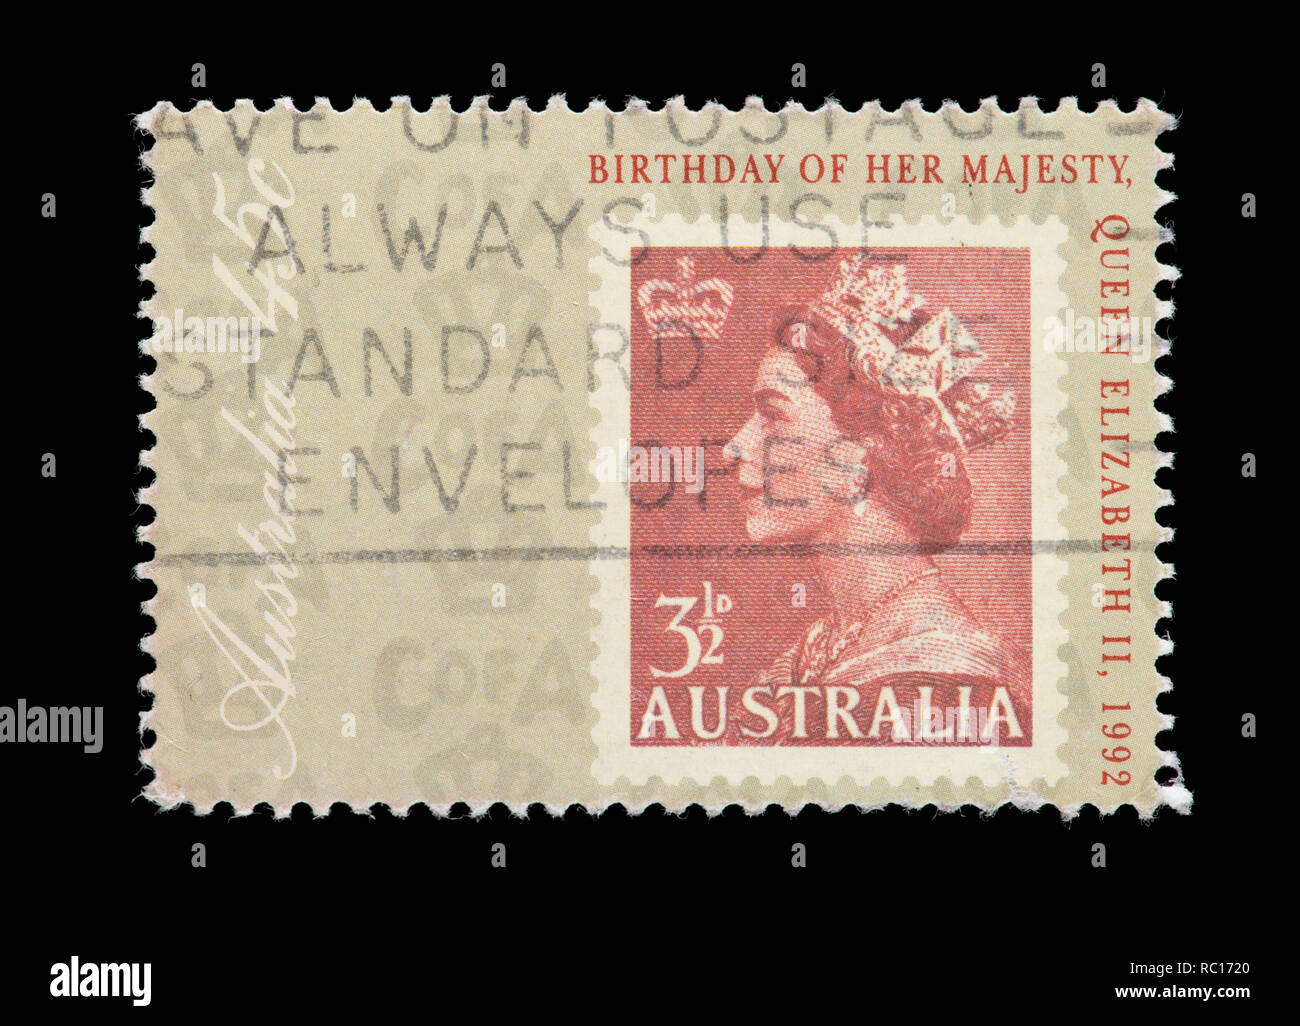 Postage stamp from Australia depicting a stamp of a stamp of Queen Elizabeth II for her 66th birthday Stock Photo